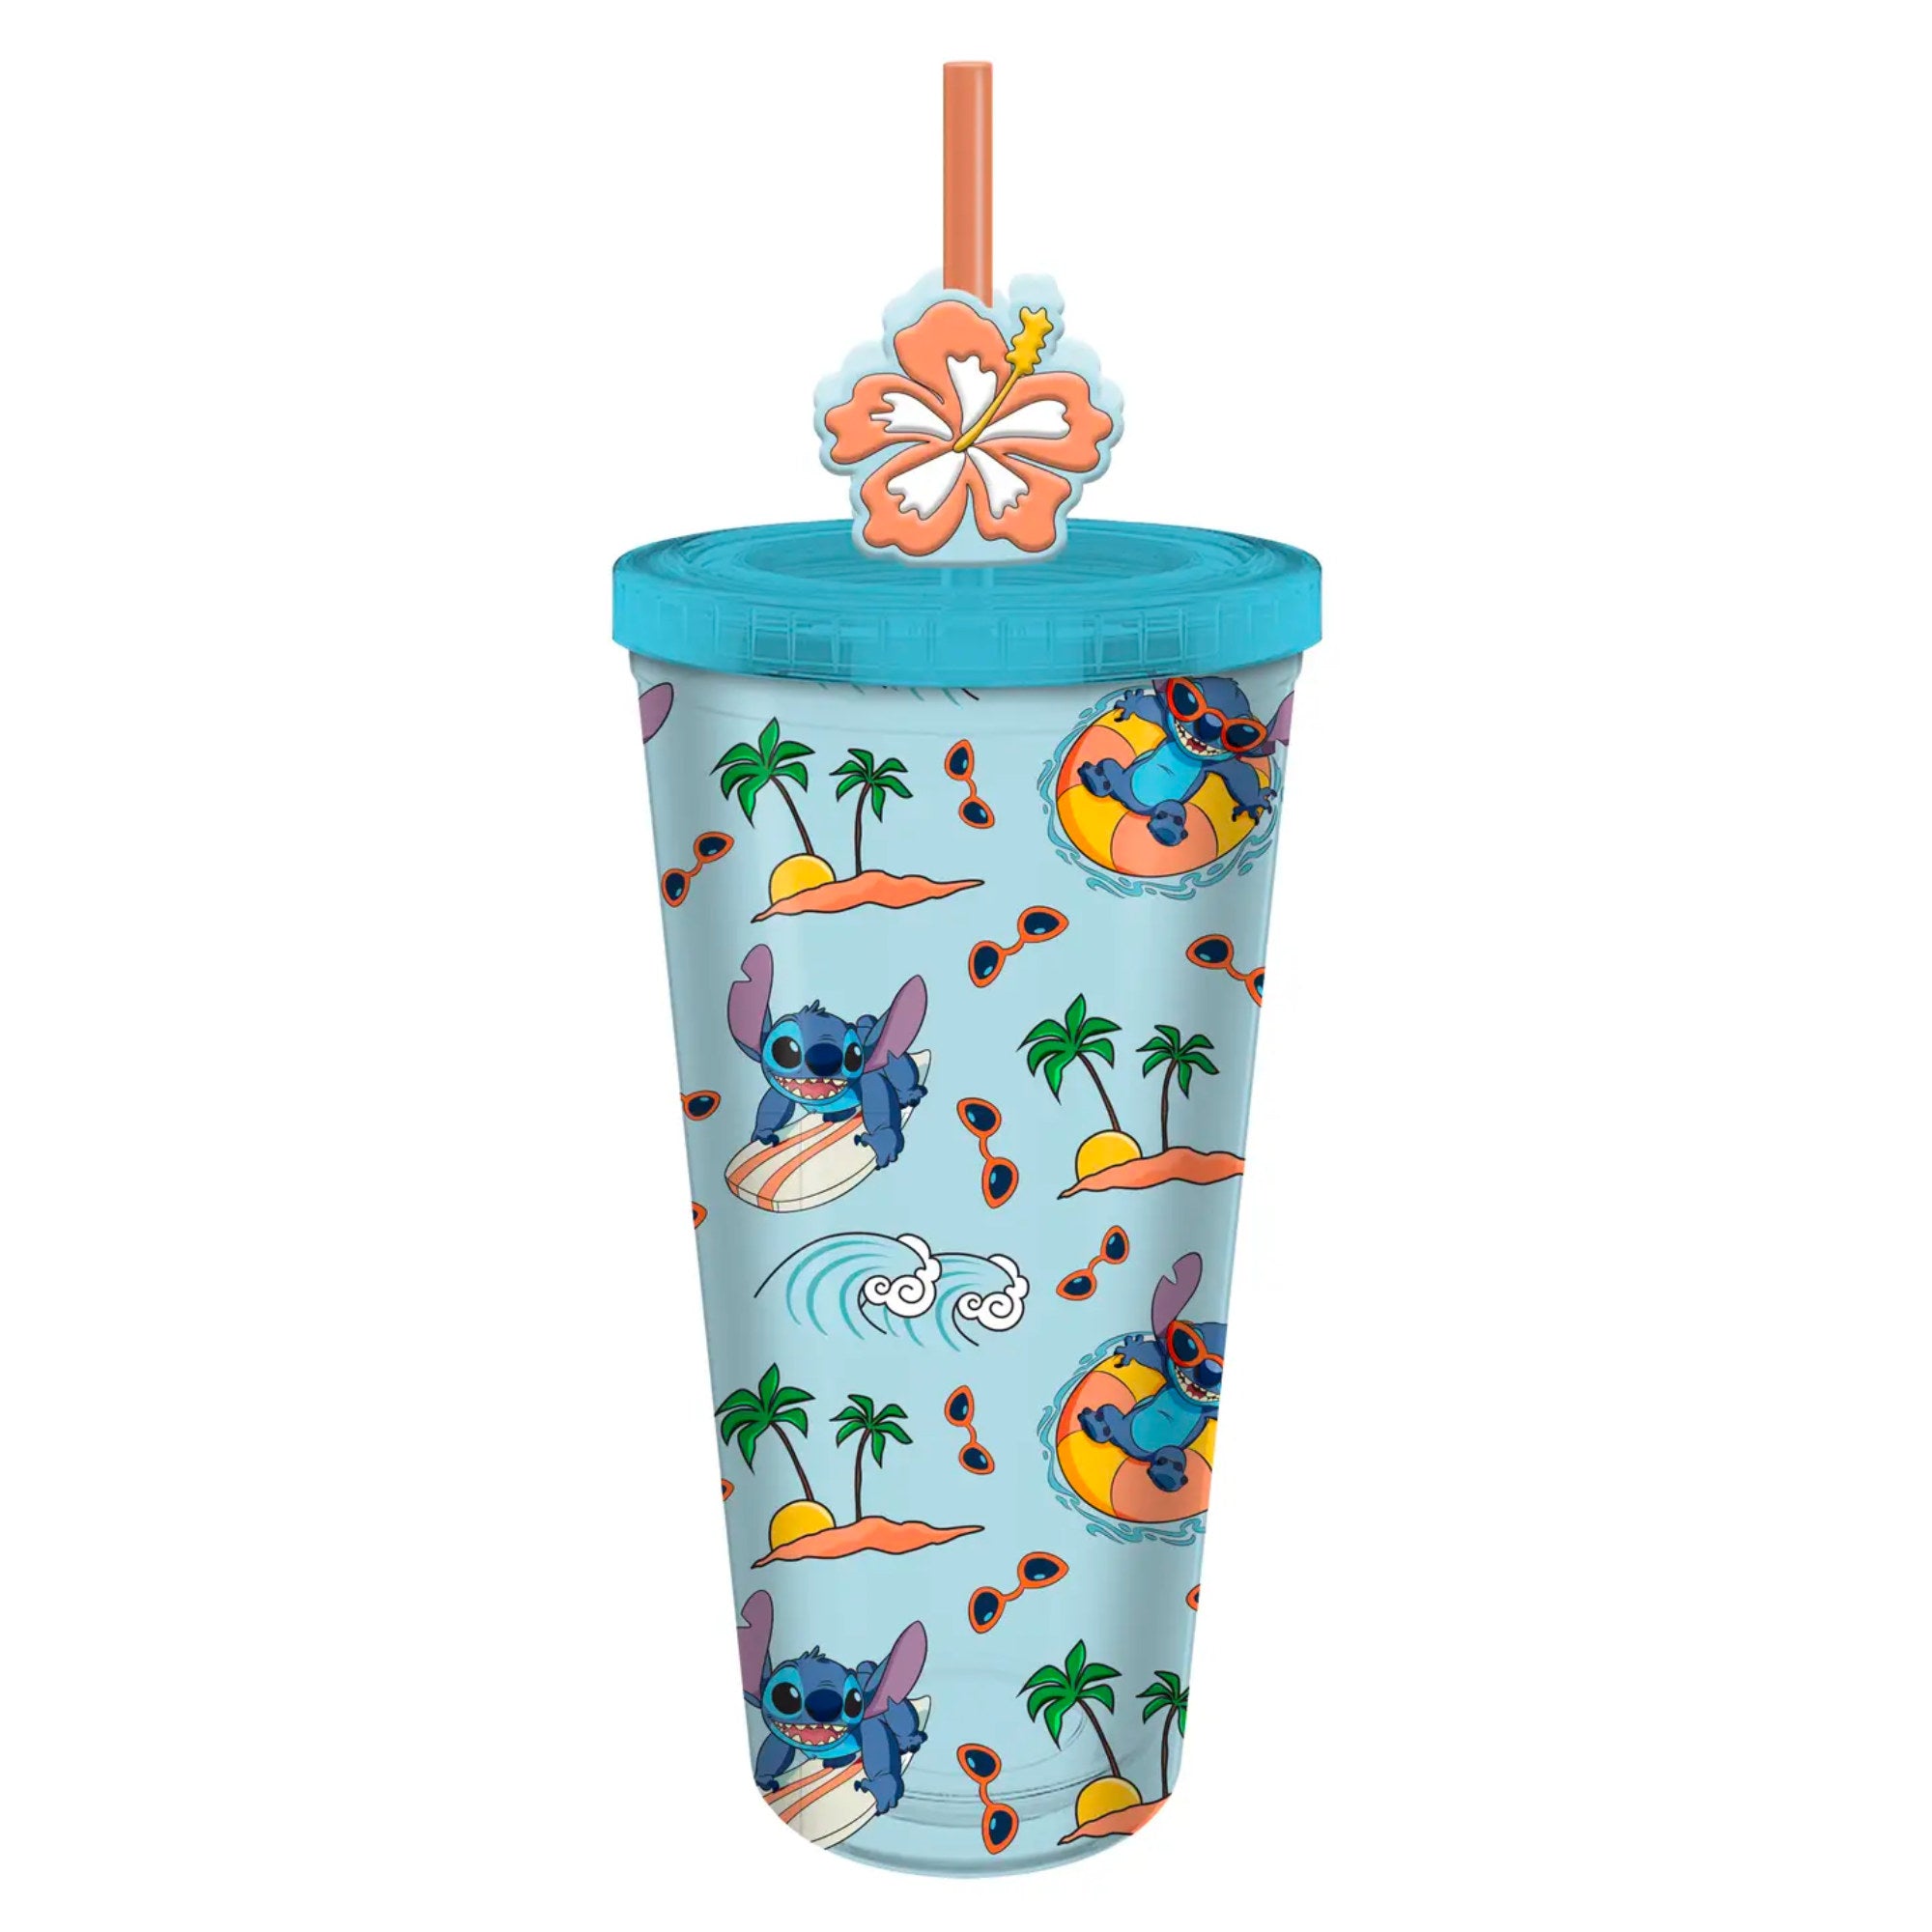 PHOTOS: New Tumbler With Cinderella Castle Straw Topper Available